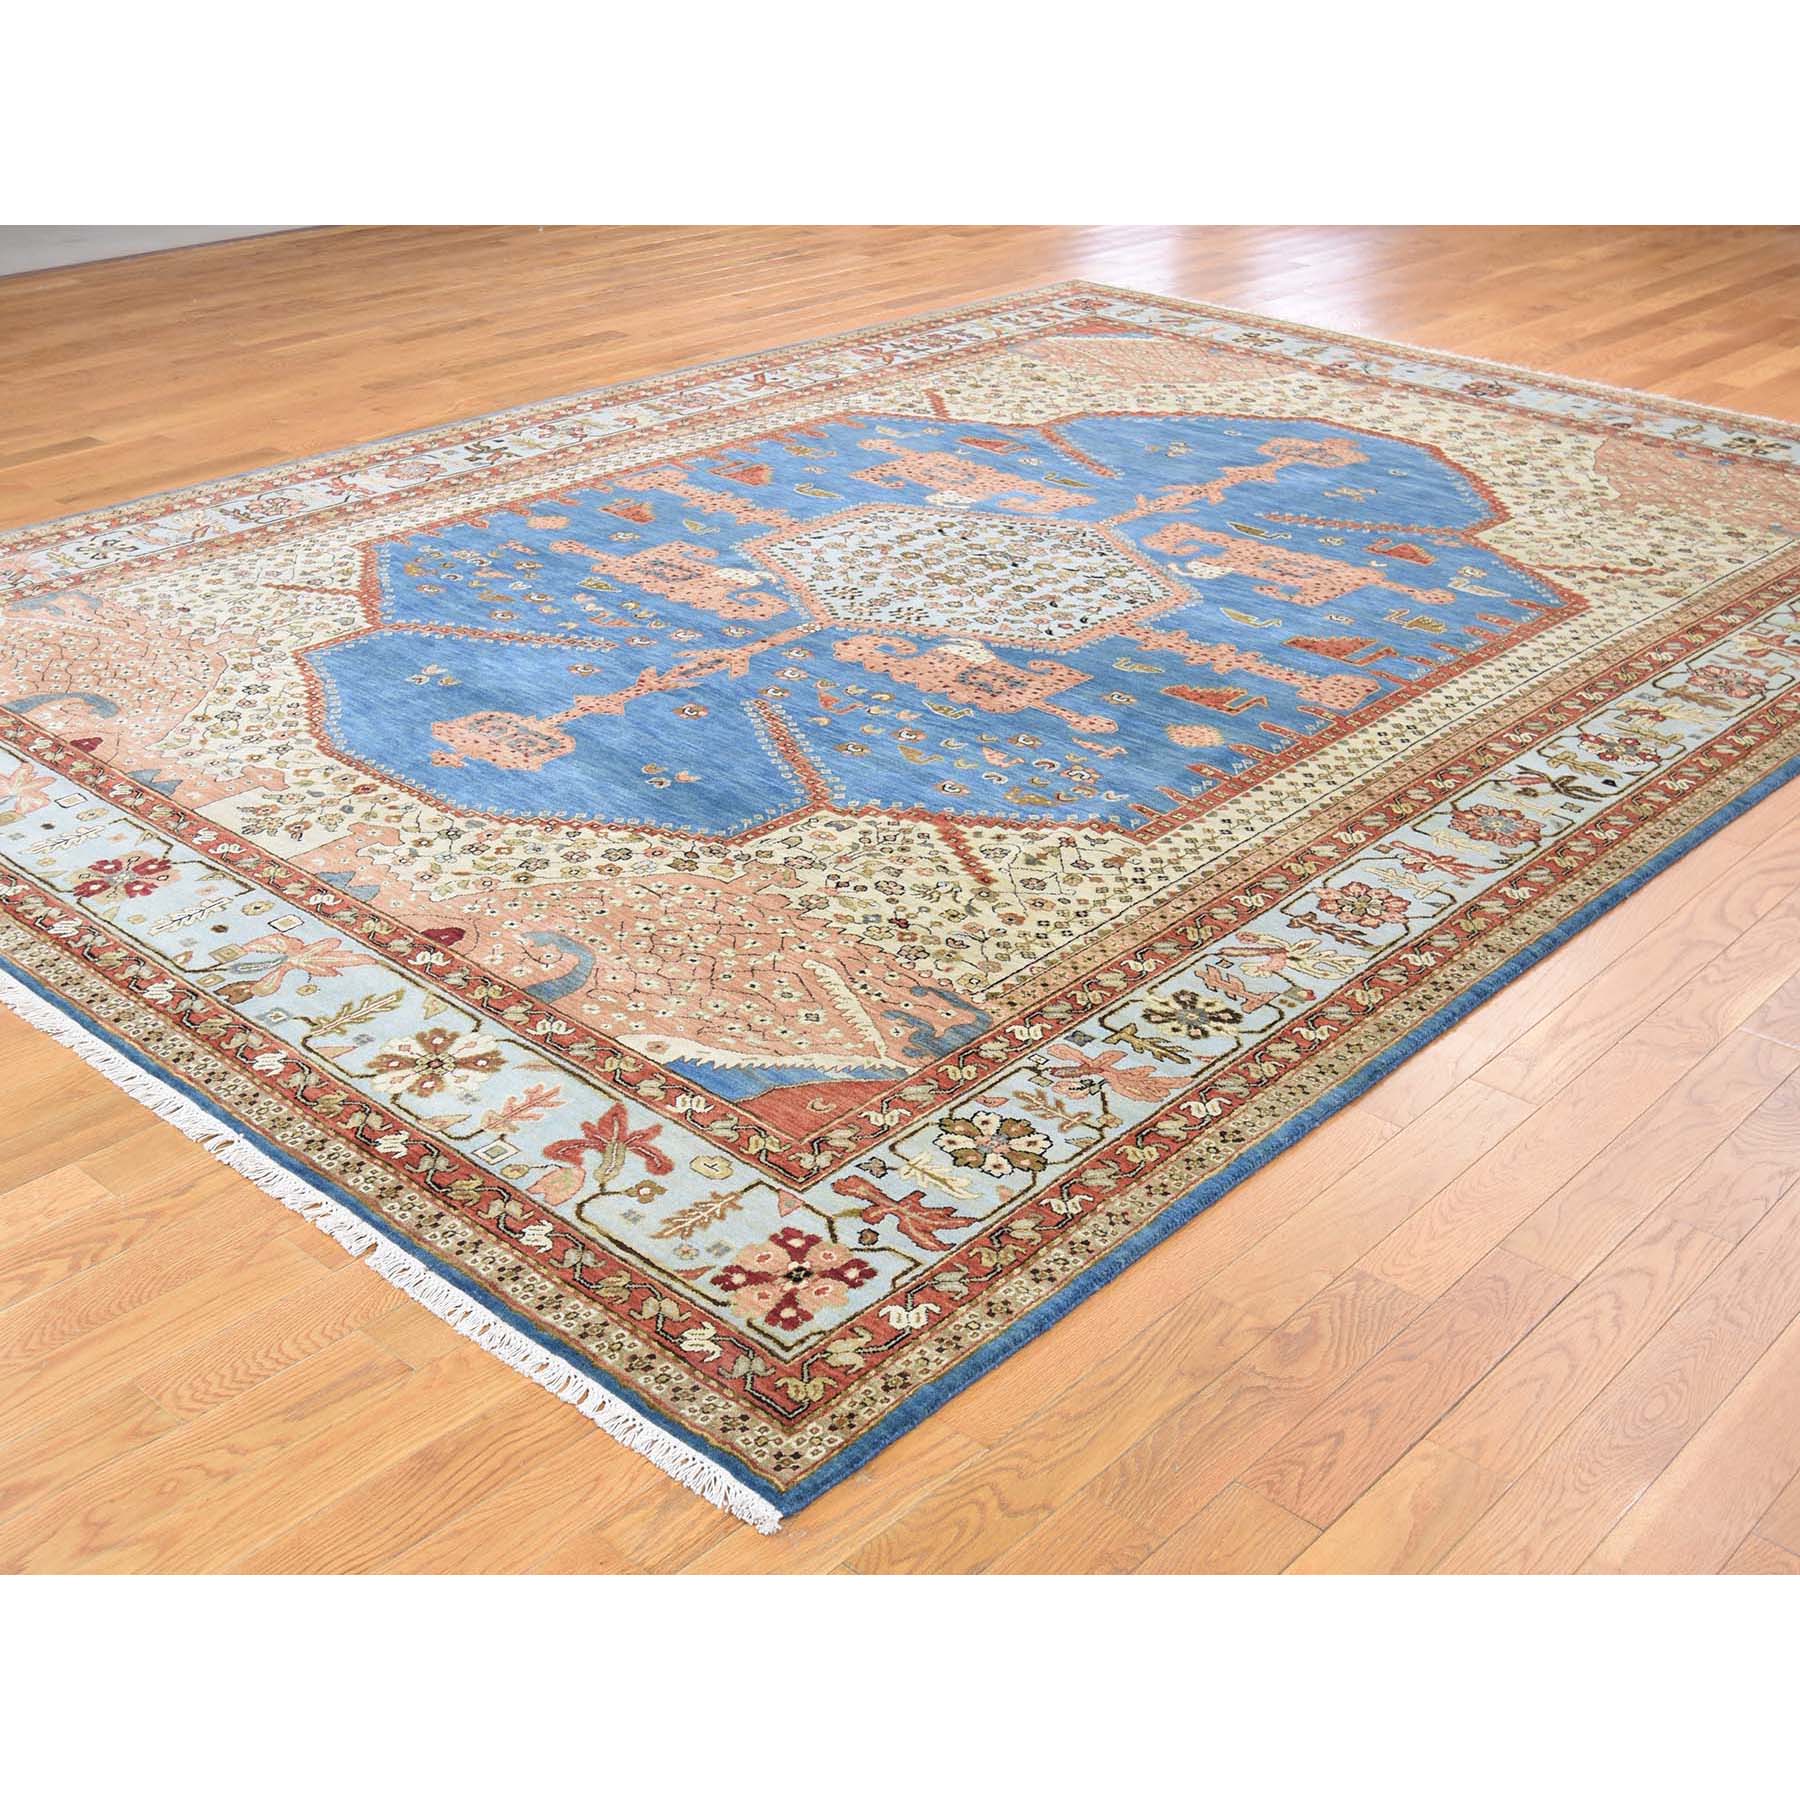 9-1 x11-8  Pure Wool Vegetable Dyes Bakshaish Hand-Knotted Oriental Rug 